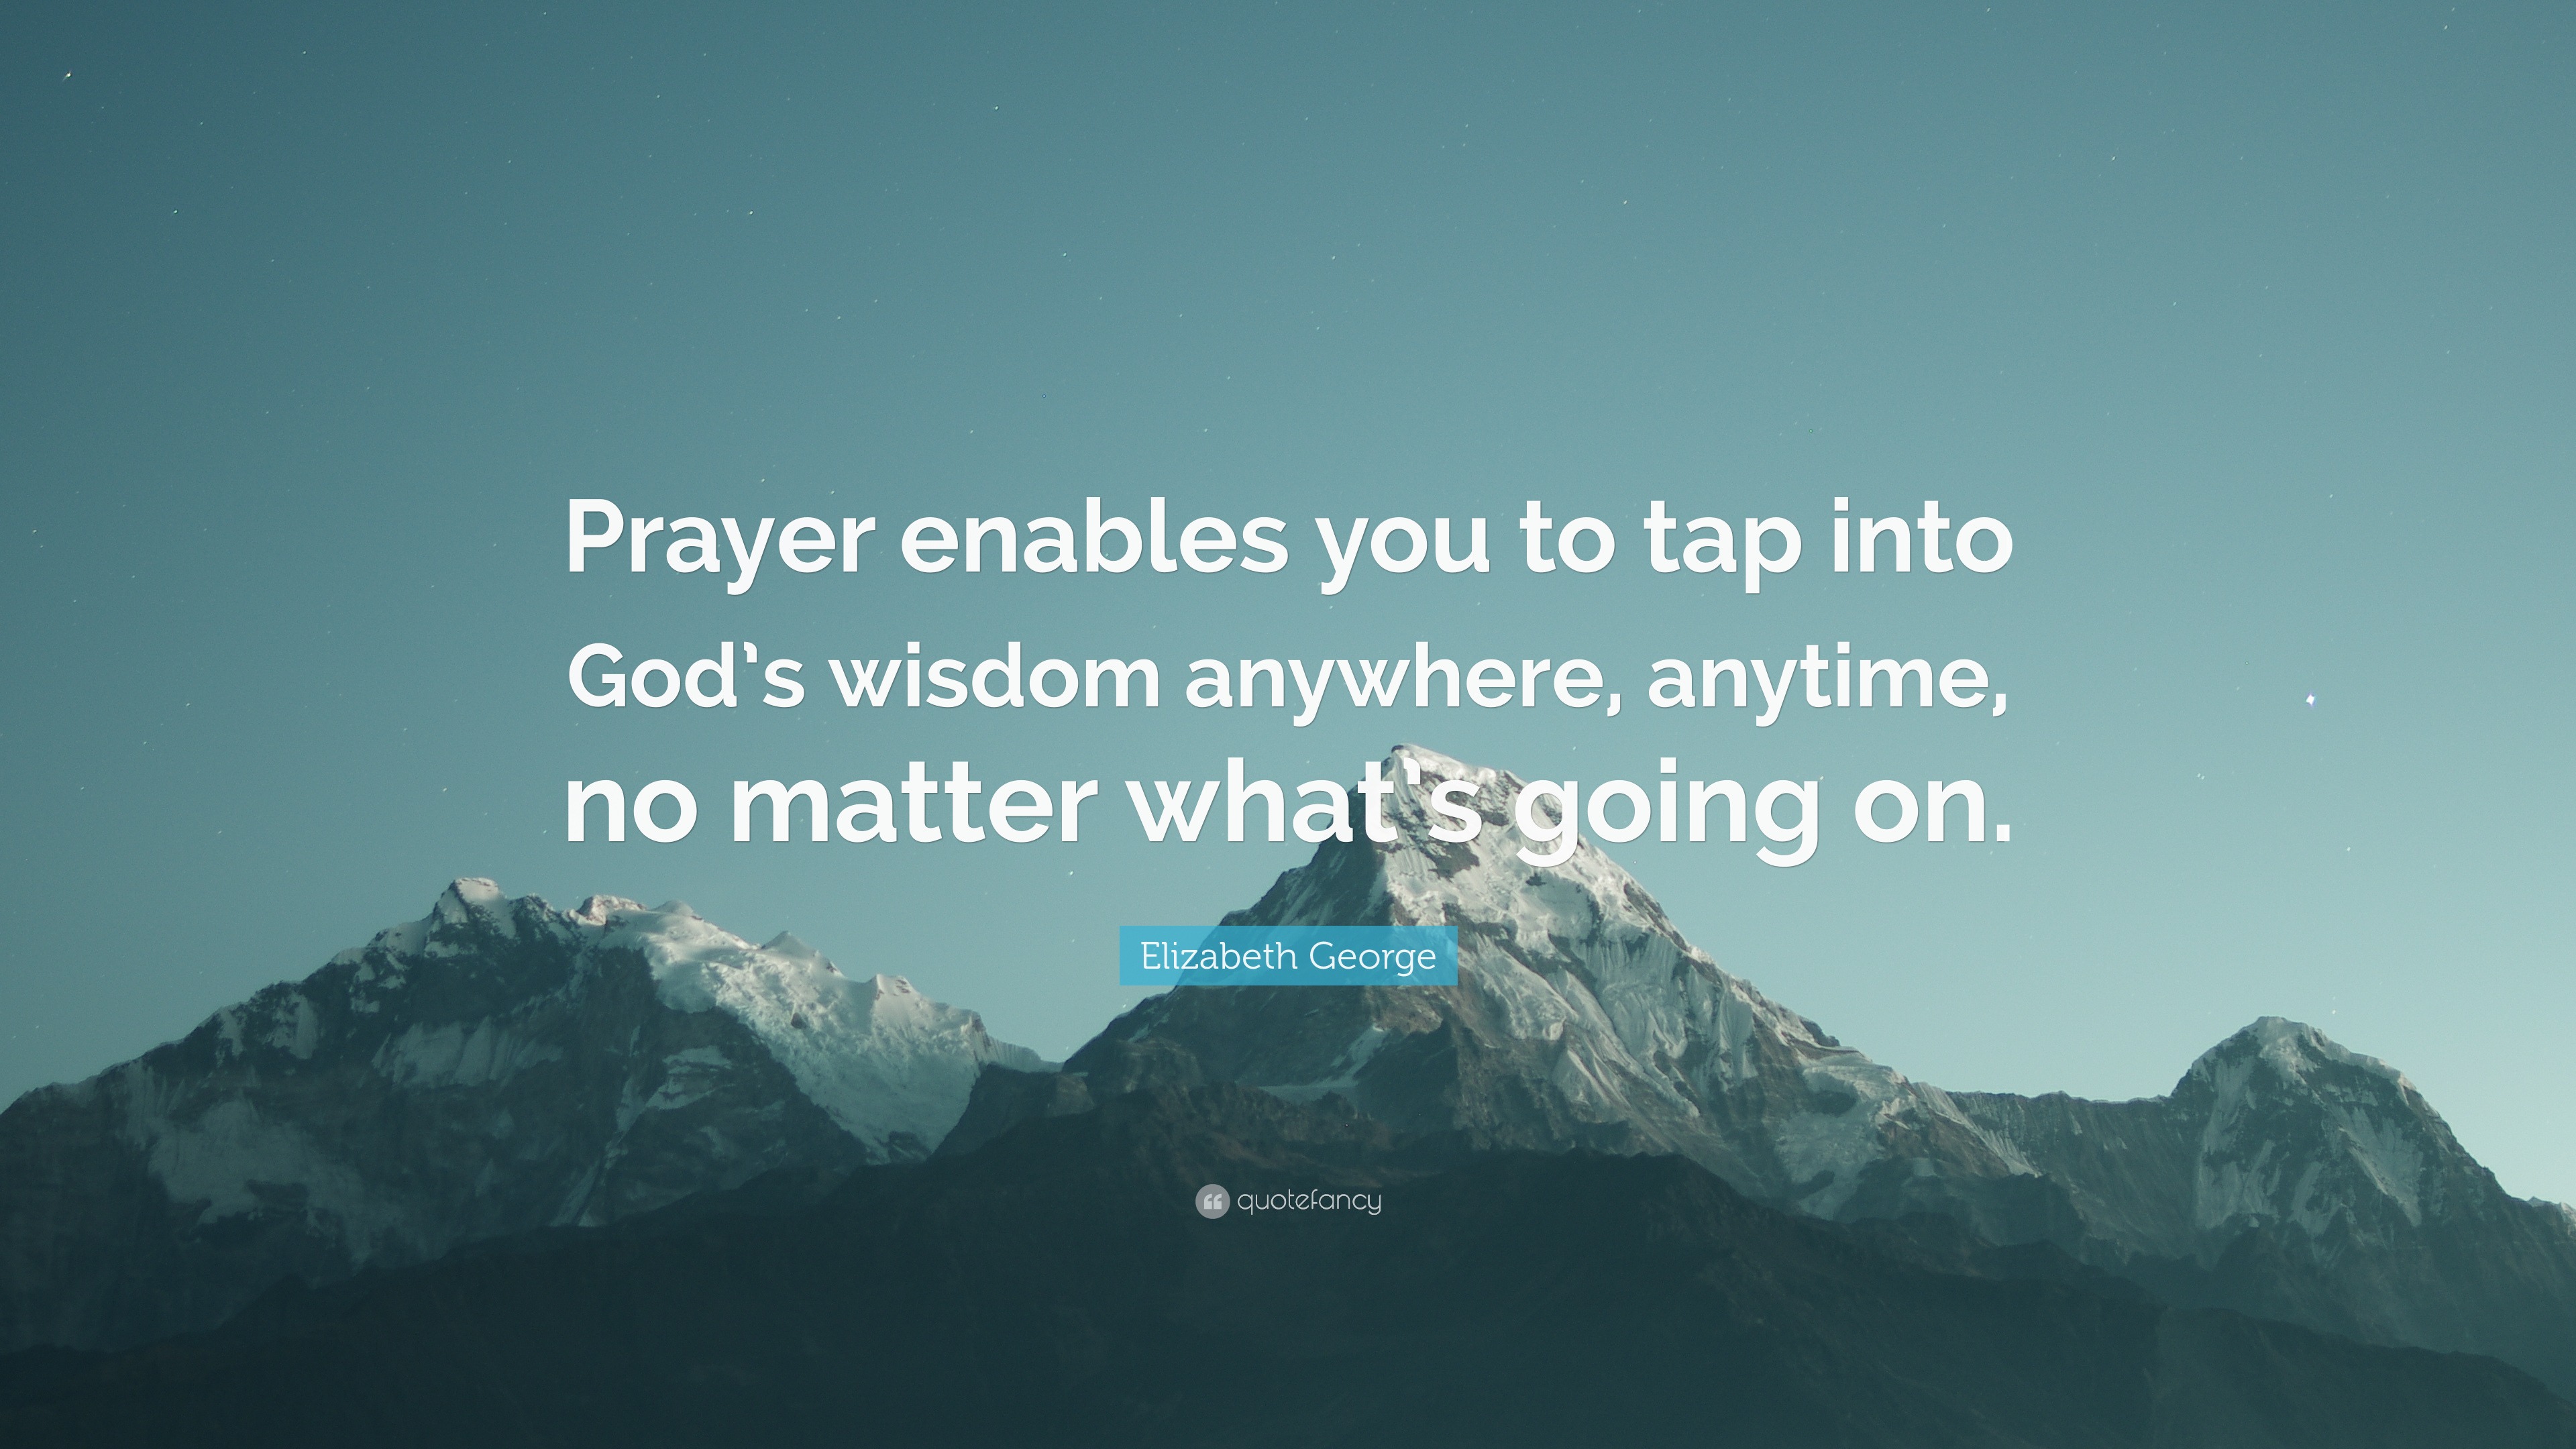 Elizabeth George Quote: “Prayer enables you to tap into God’s wisdom ...